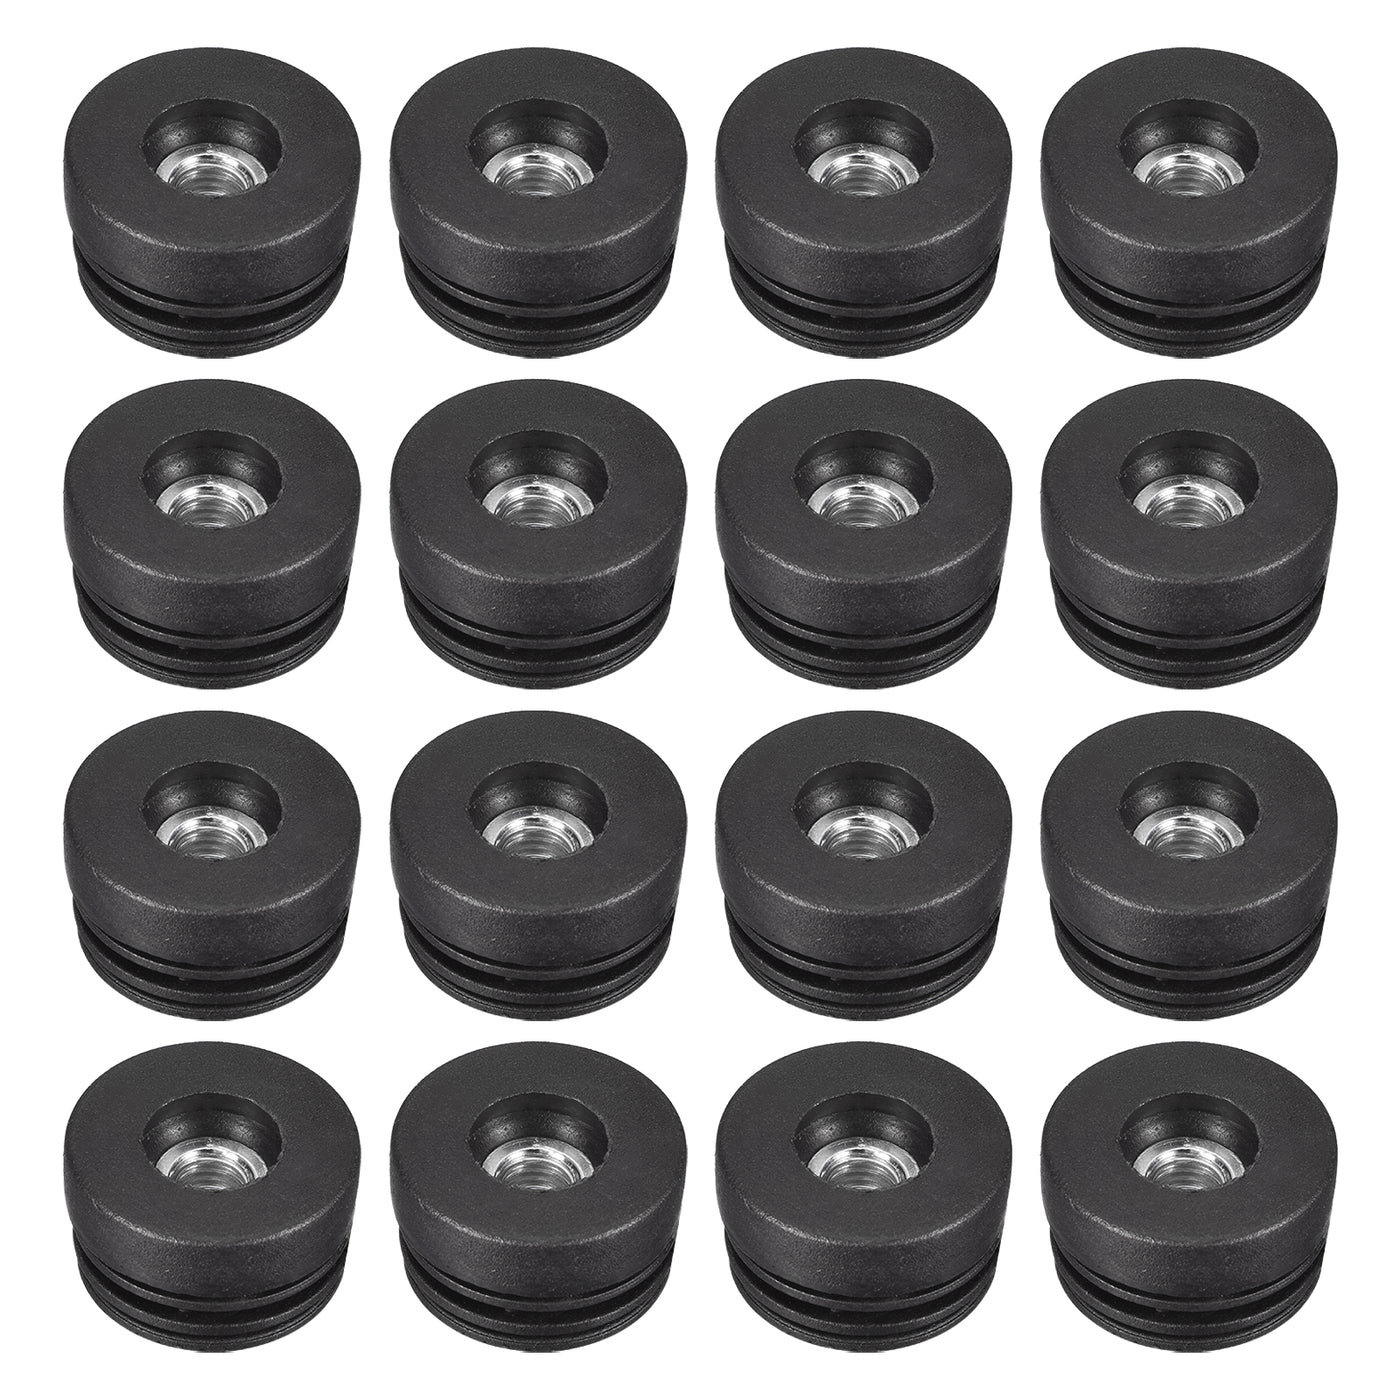 uxcell Uxcell 24Pcs 38mm/1.5" Caster Insert with Thread, Round M10 Thread for Furniture